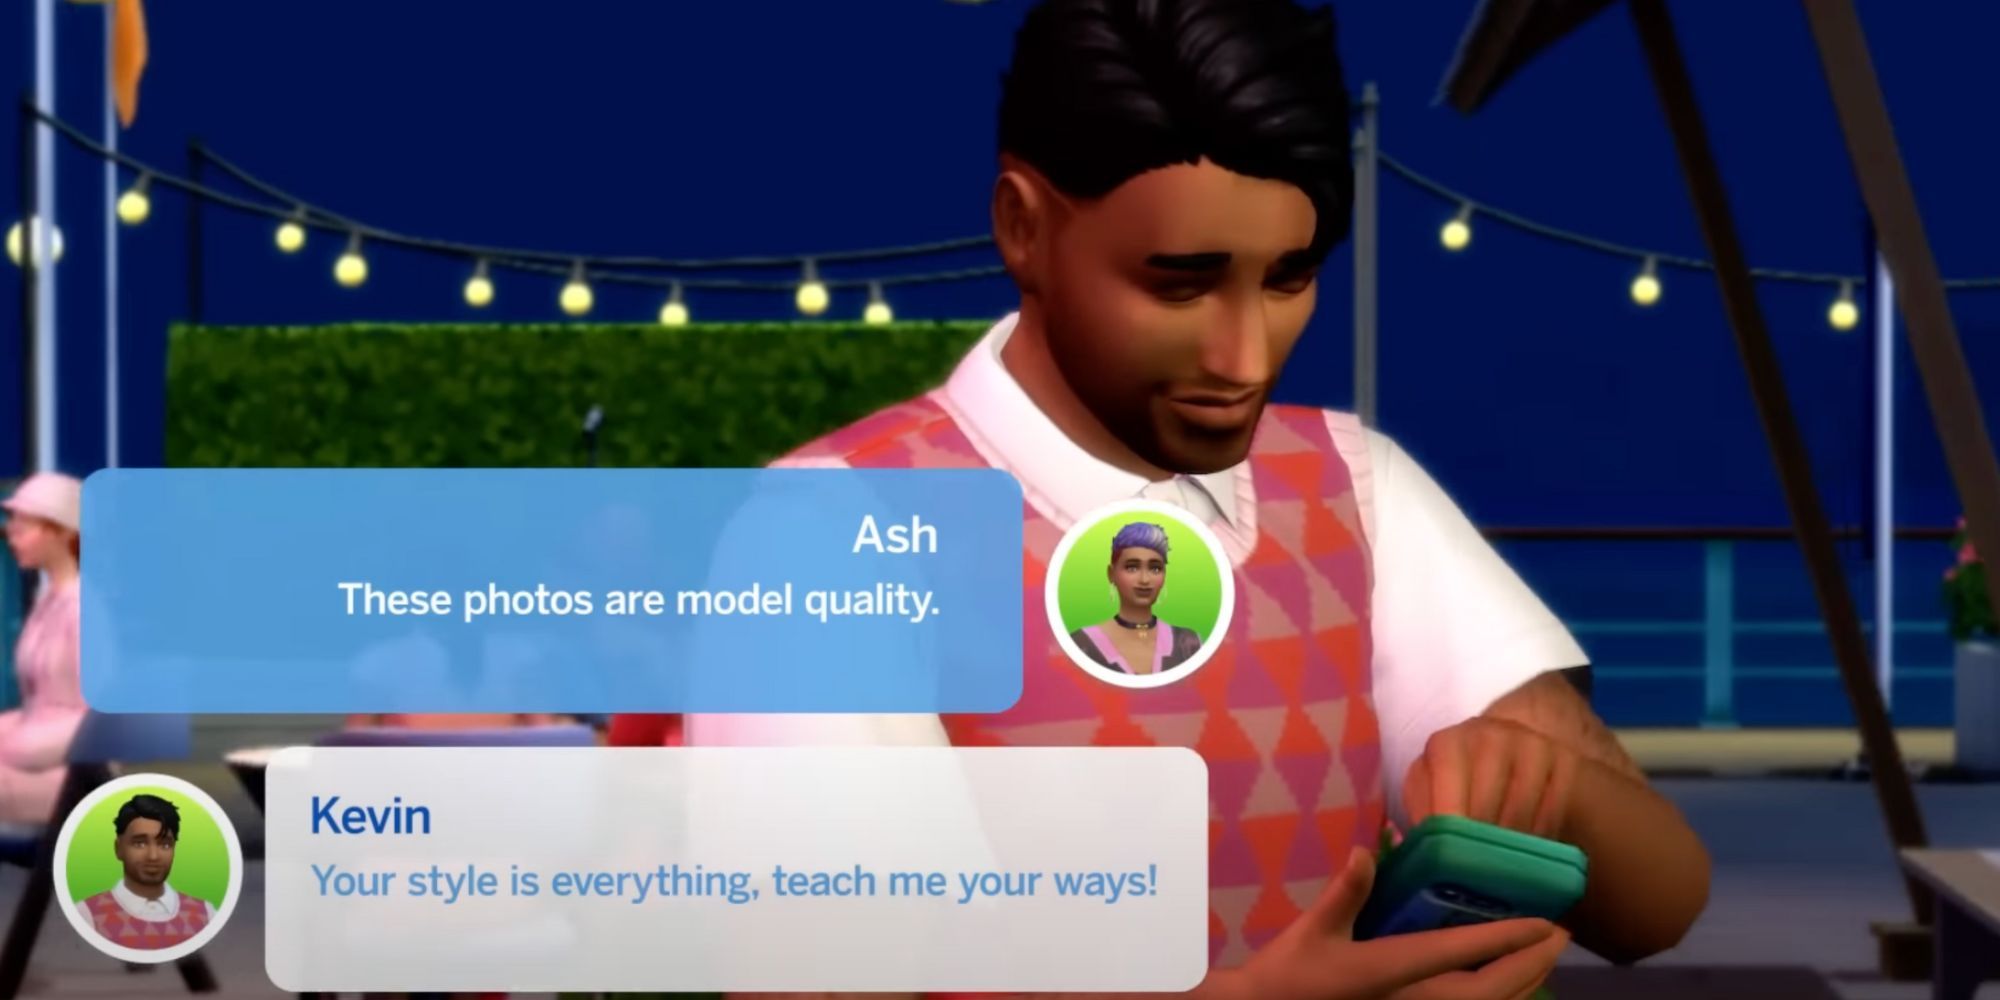 Sims Teenage Texting on Phone with Text Messages